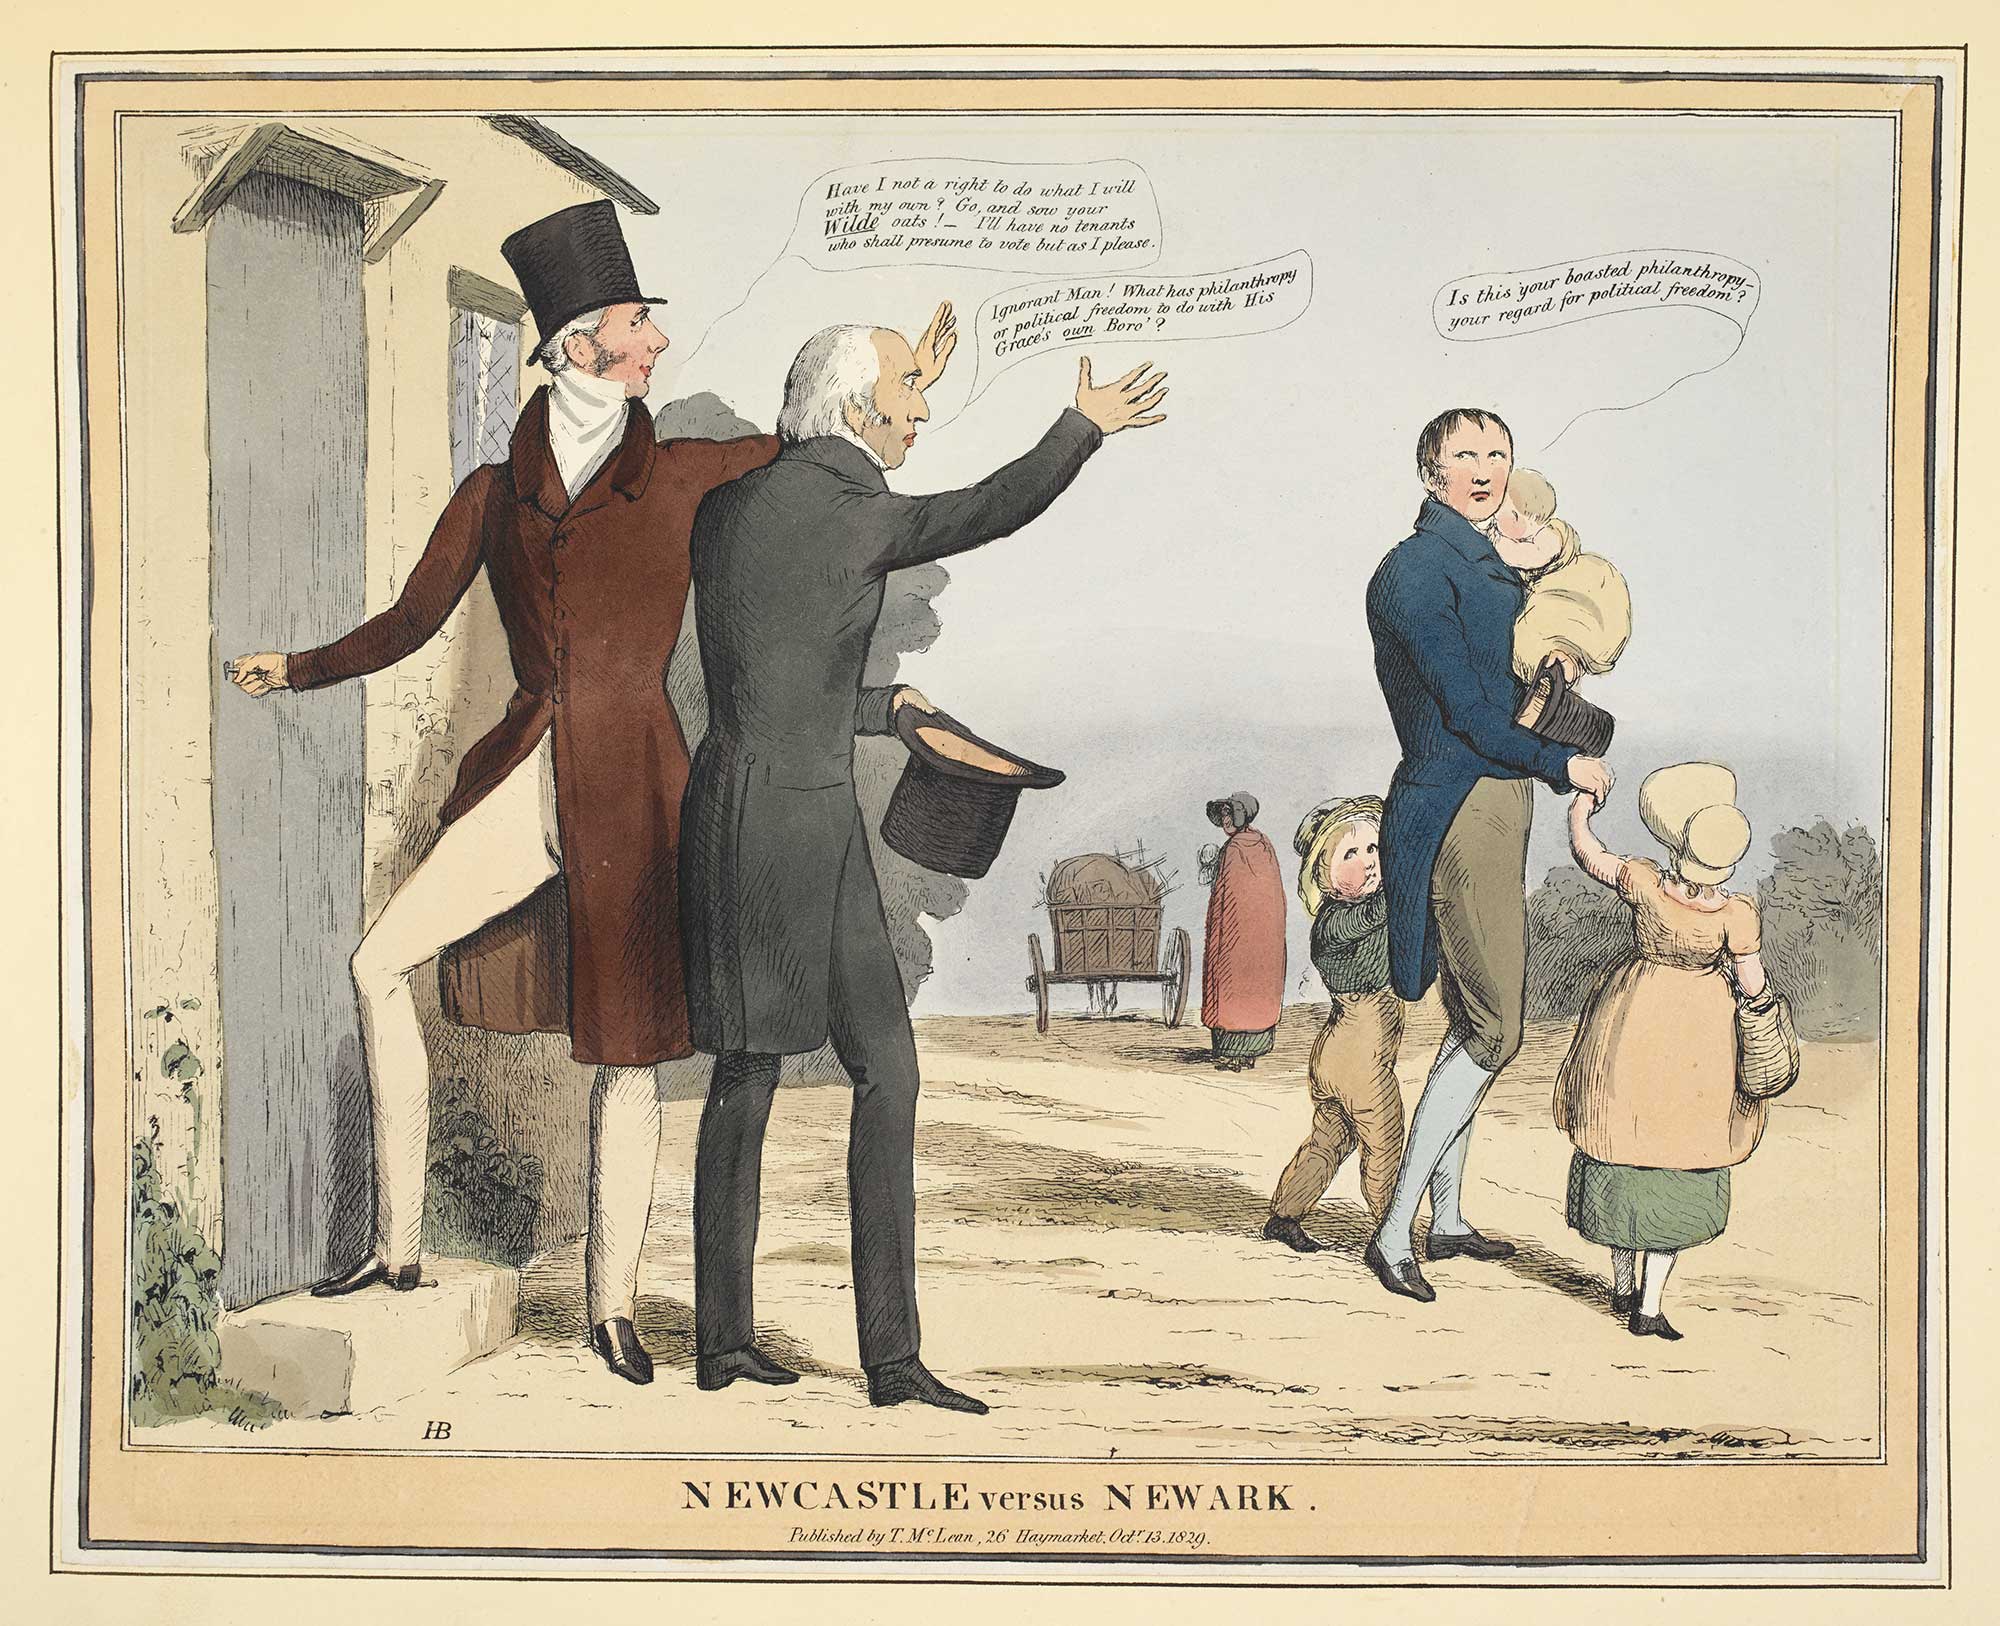 Satirical Expressions: Exploring Political Cartoons from the 19th Century